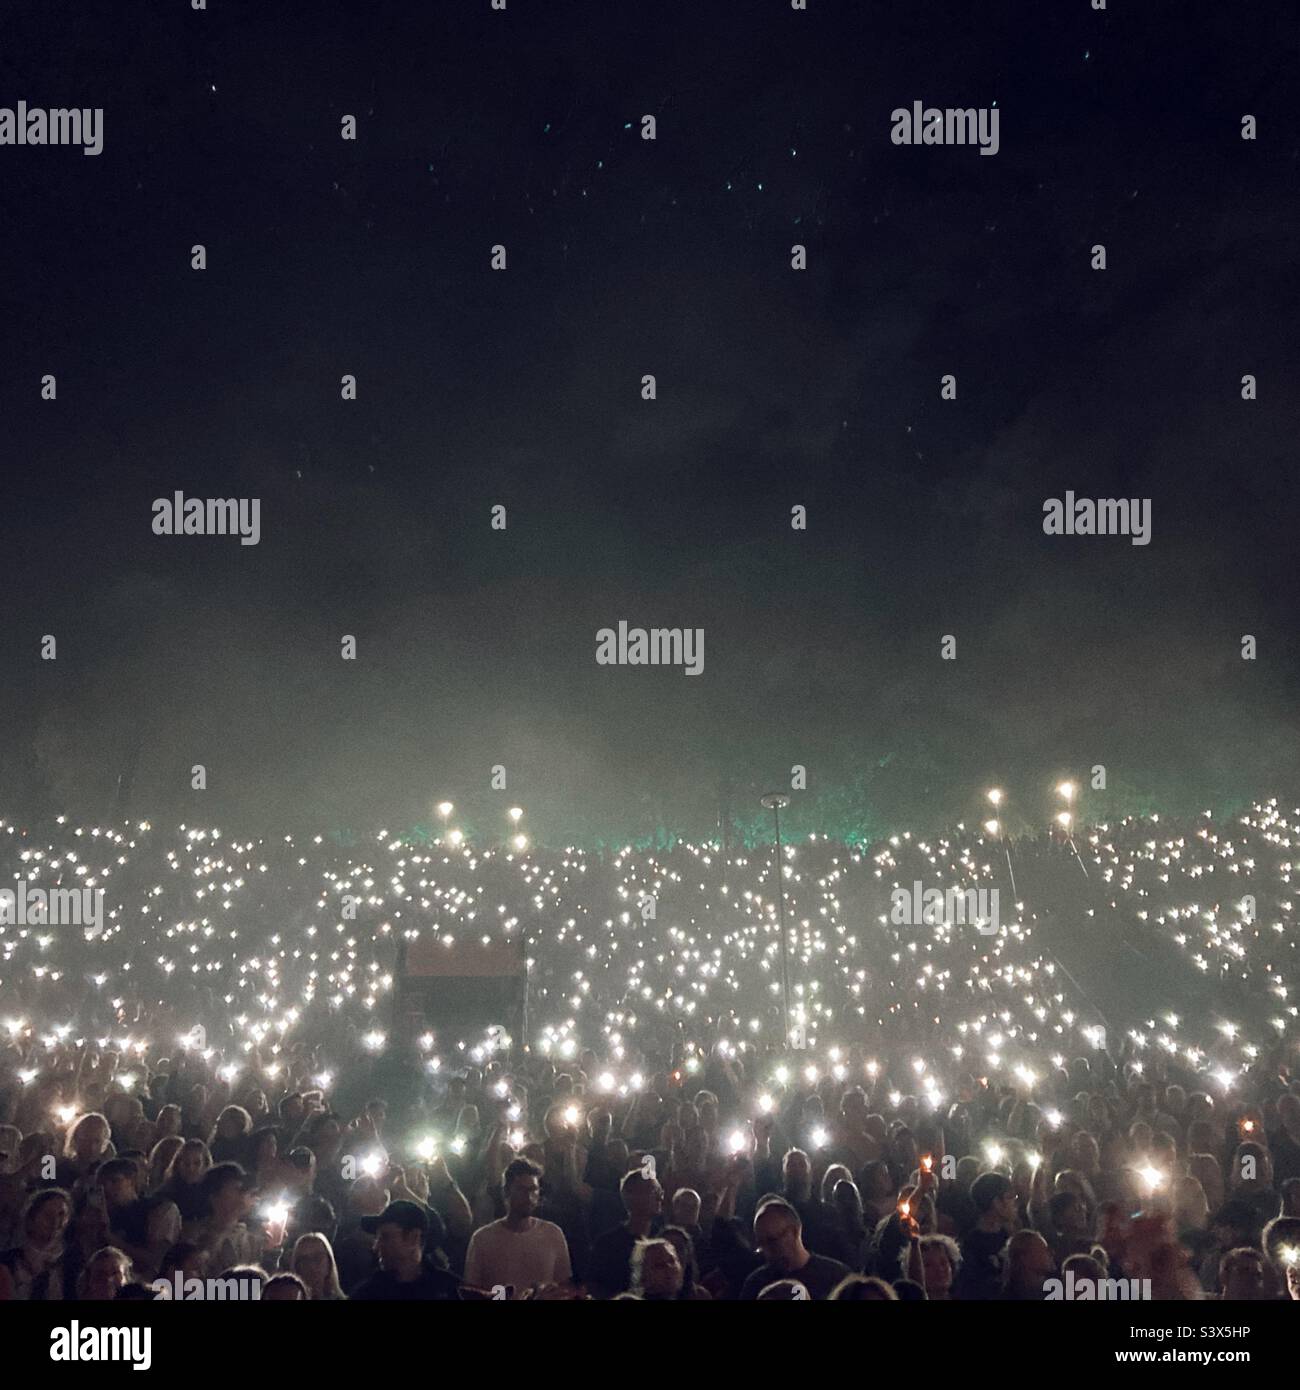 Crowd at a pop concert Holding up their mobile phone flashlights Stock Photo